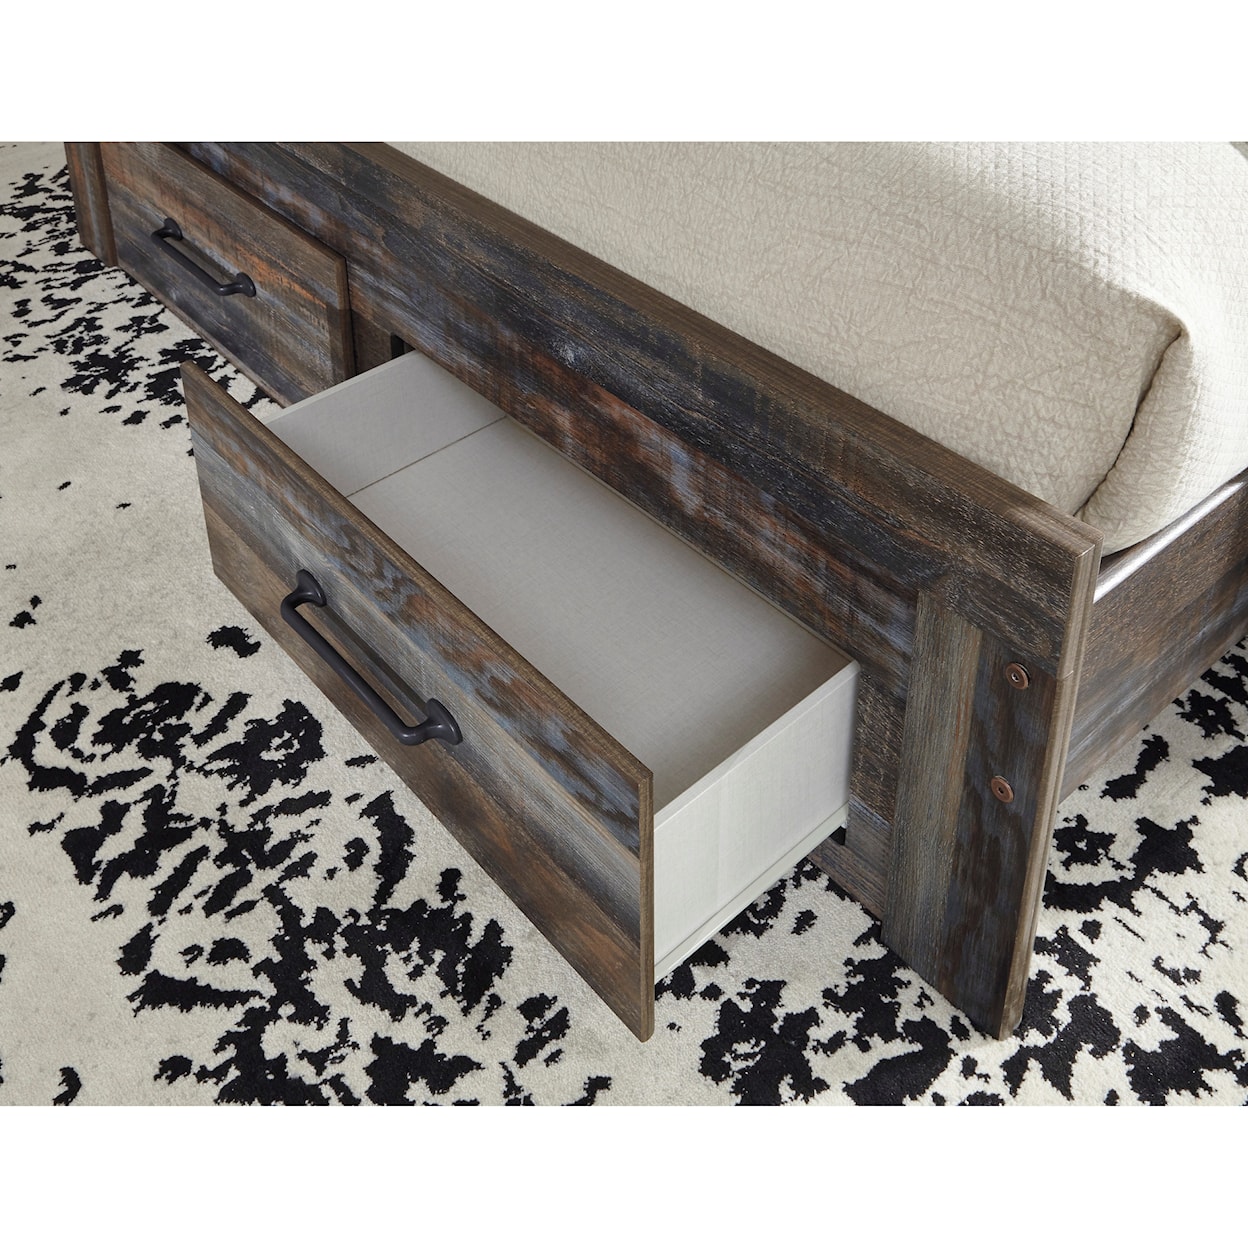 Ashley Signature Design Drystan Queen Bed w/ Lights & Footboard Drawers